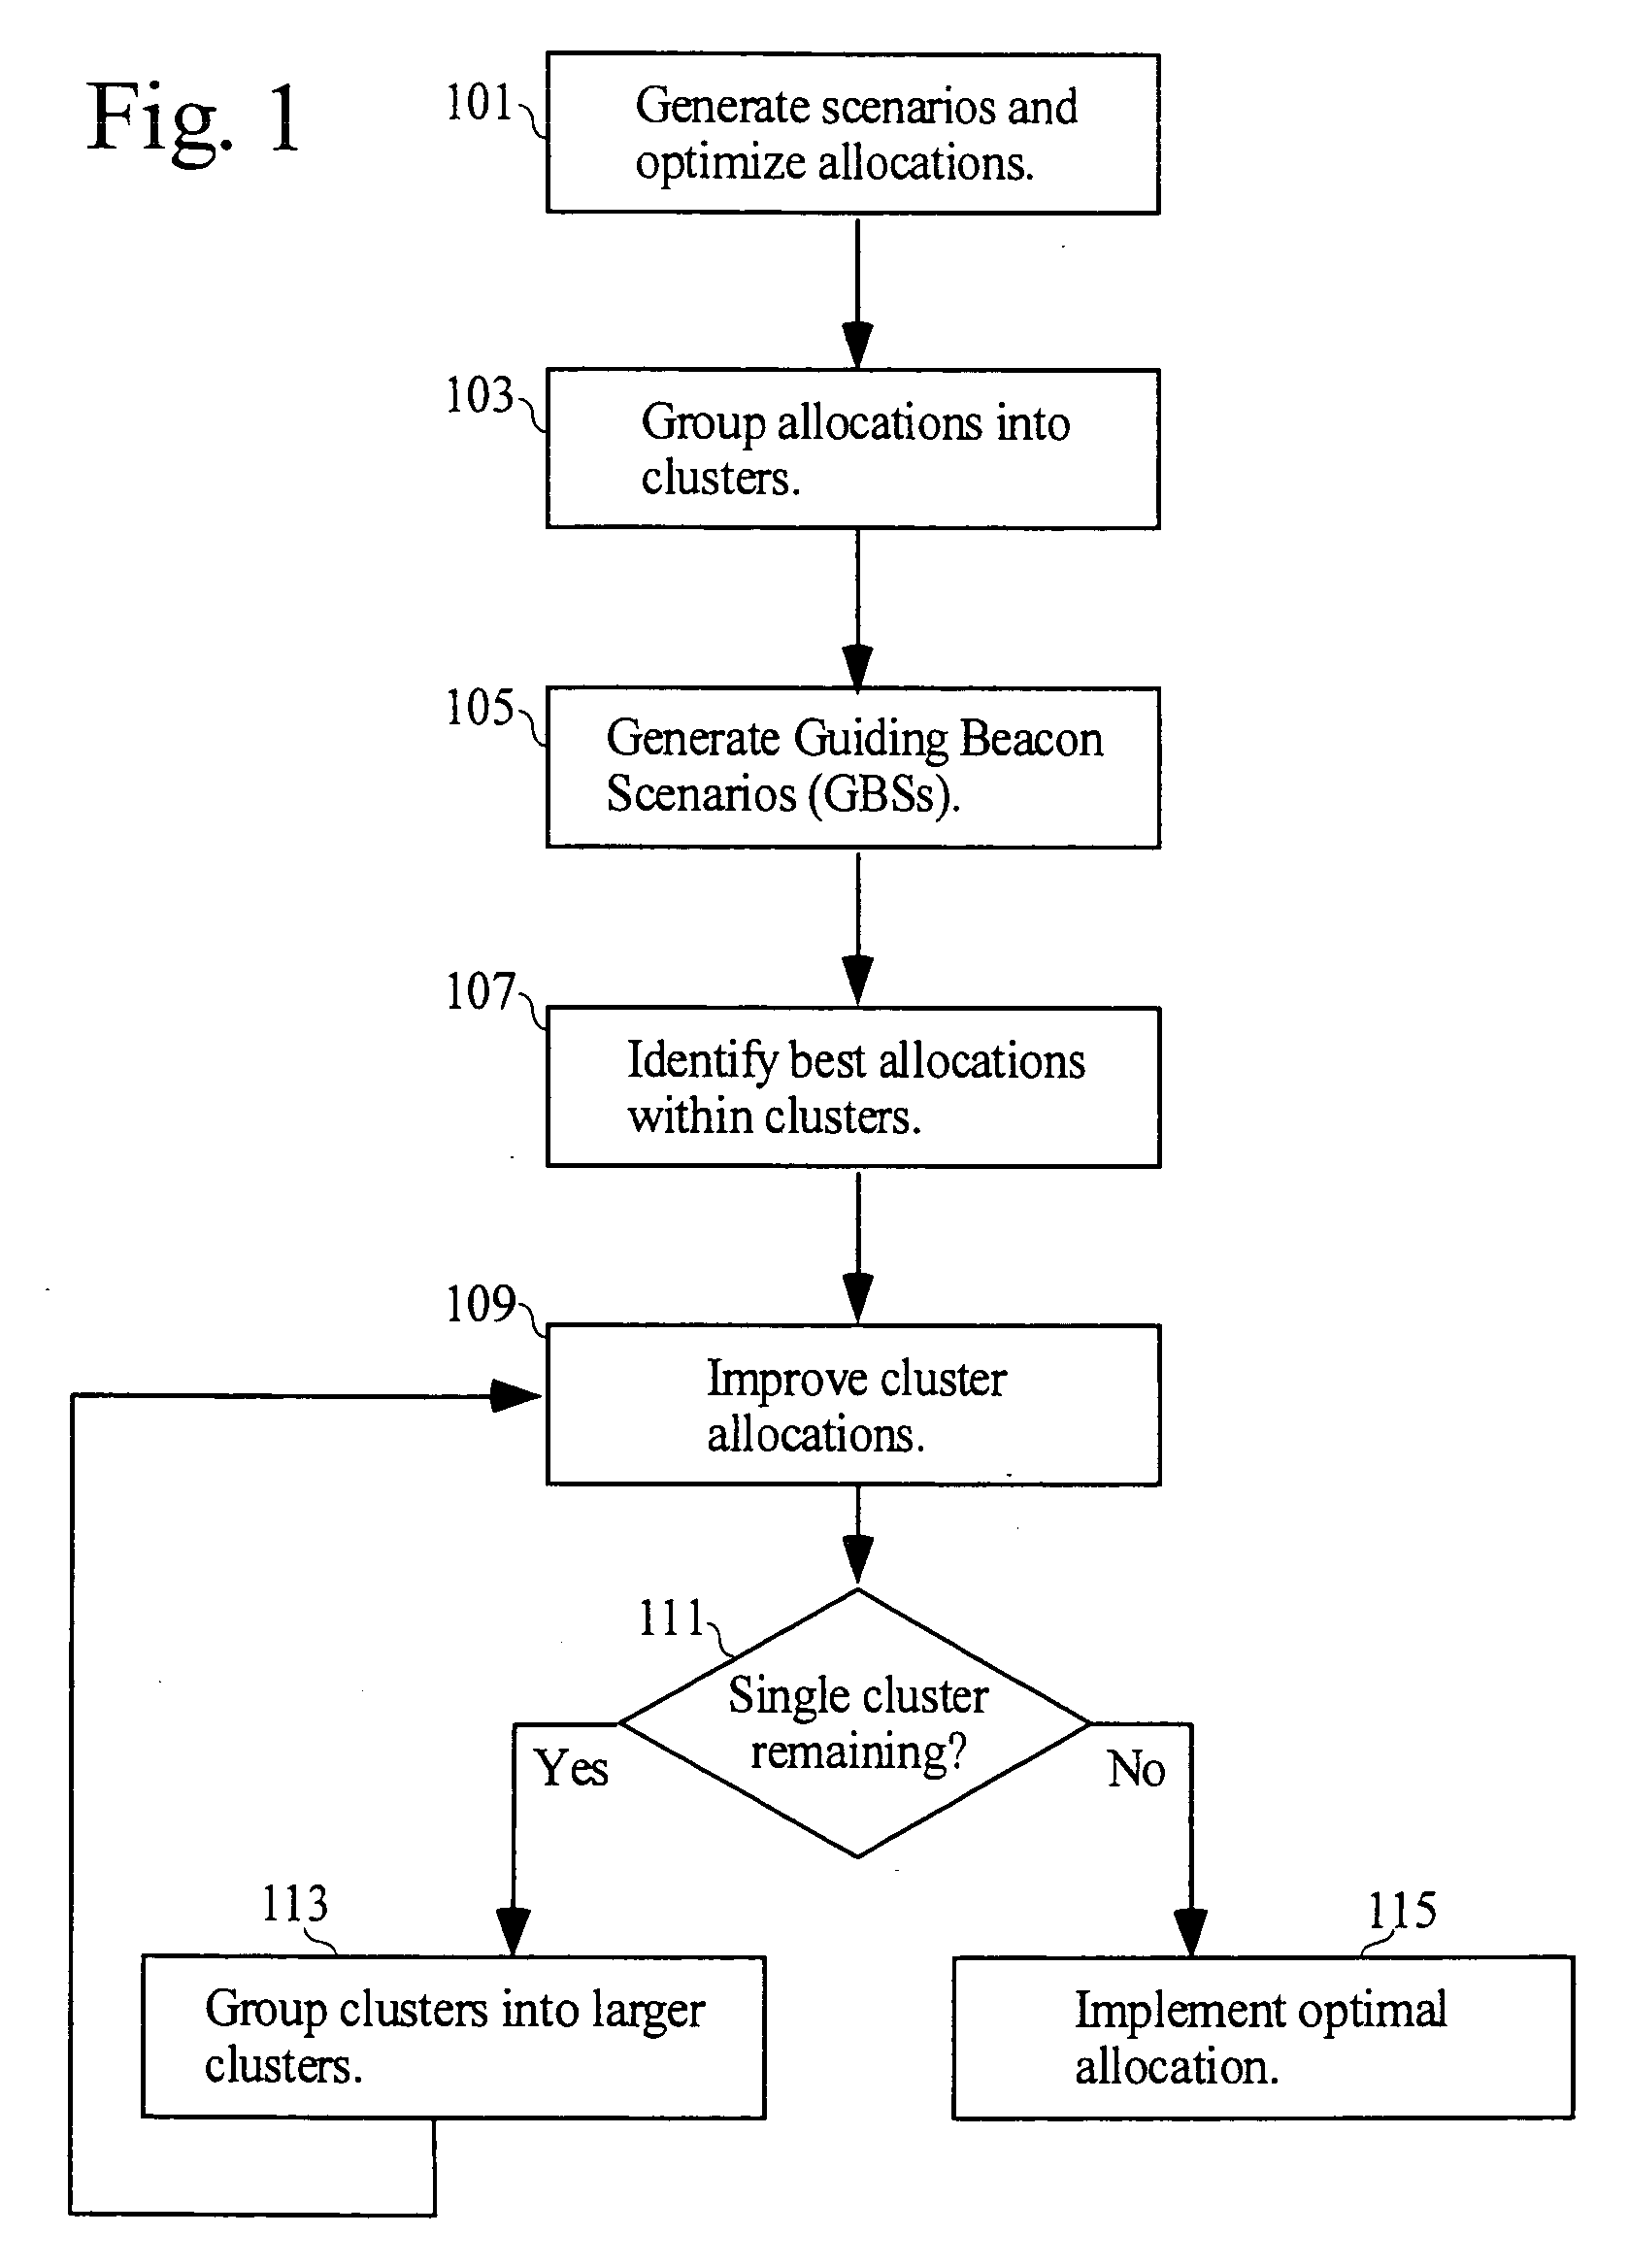 Methods apparatus for allocating resources in the presence of uncertainty